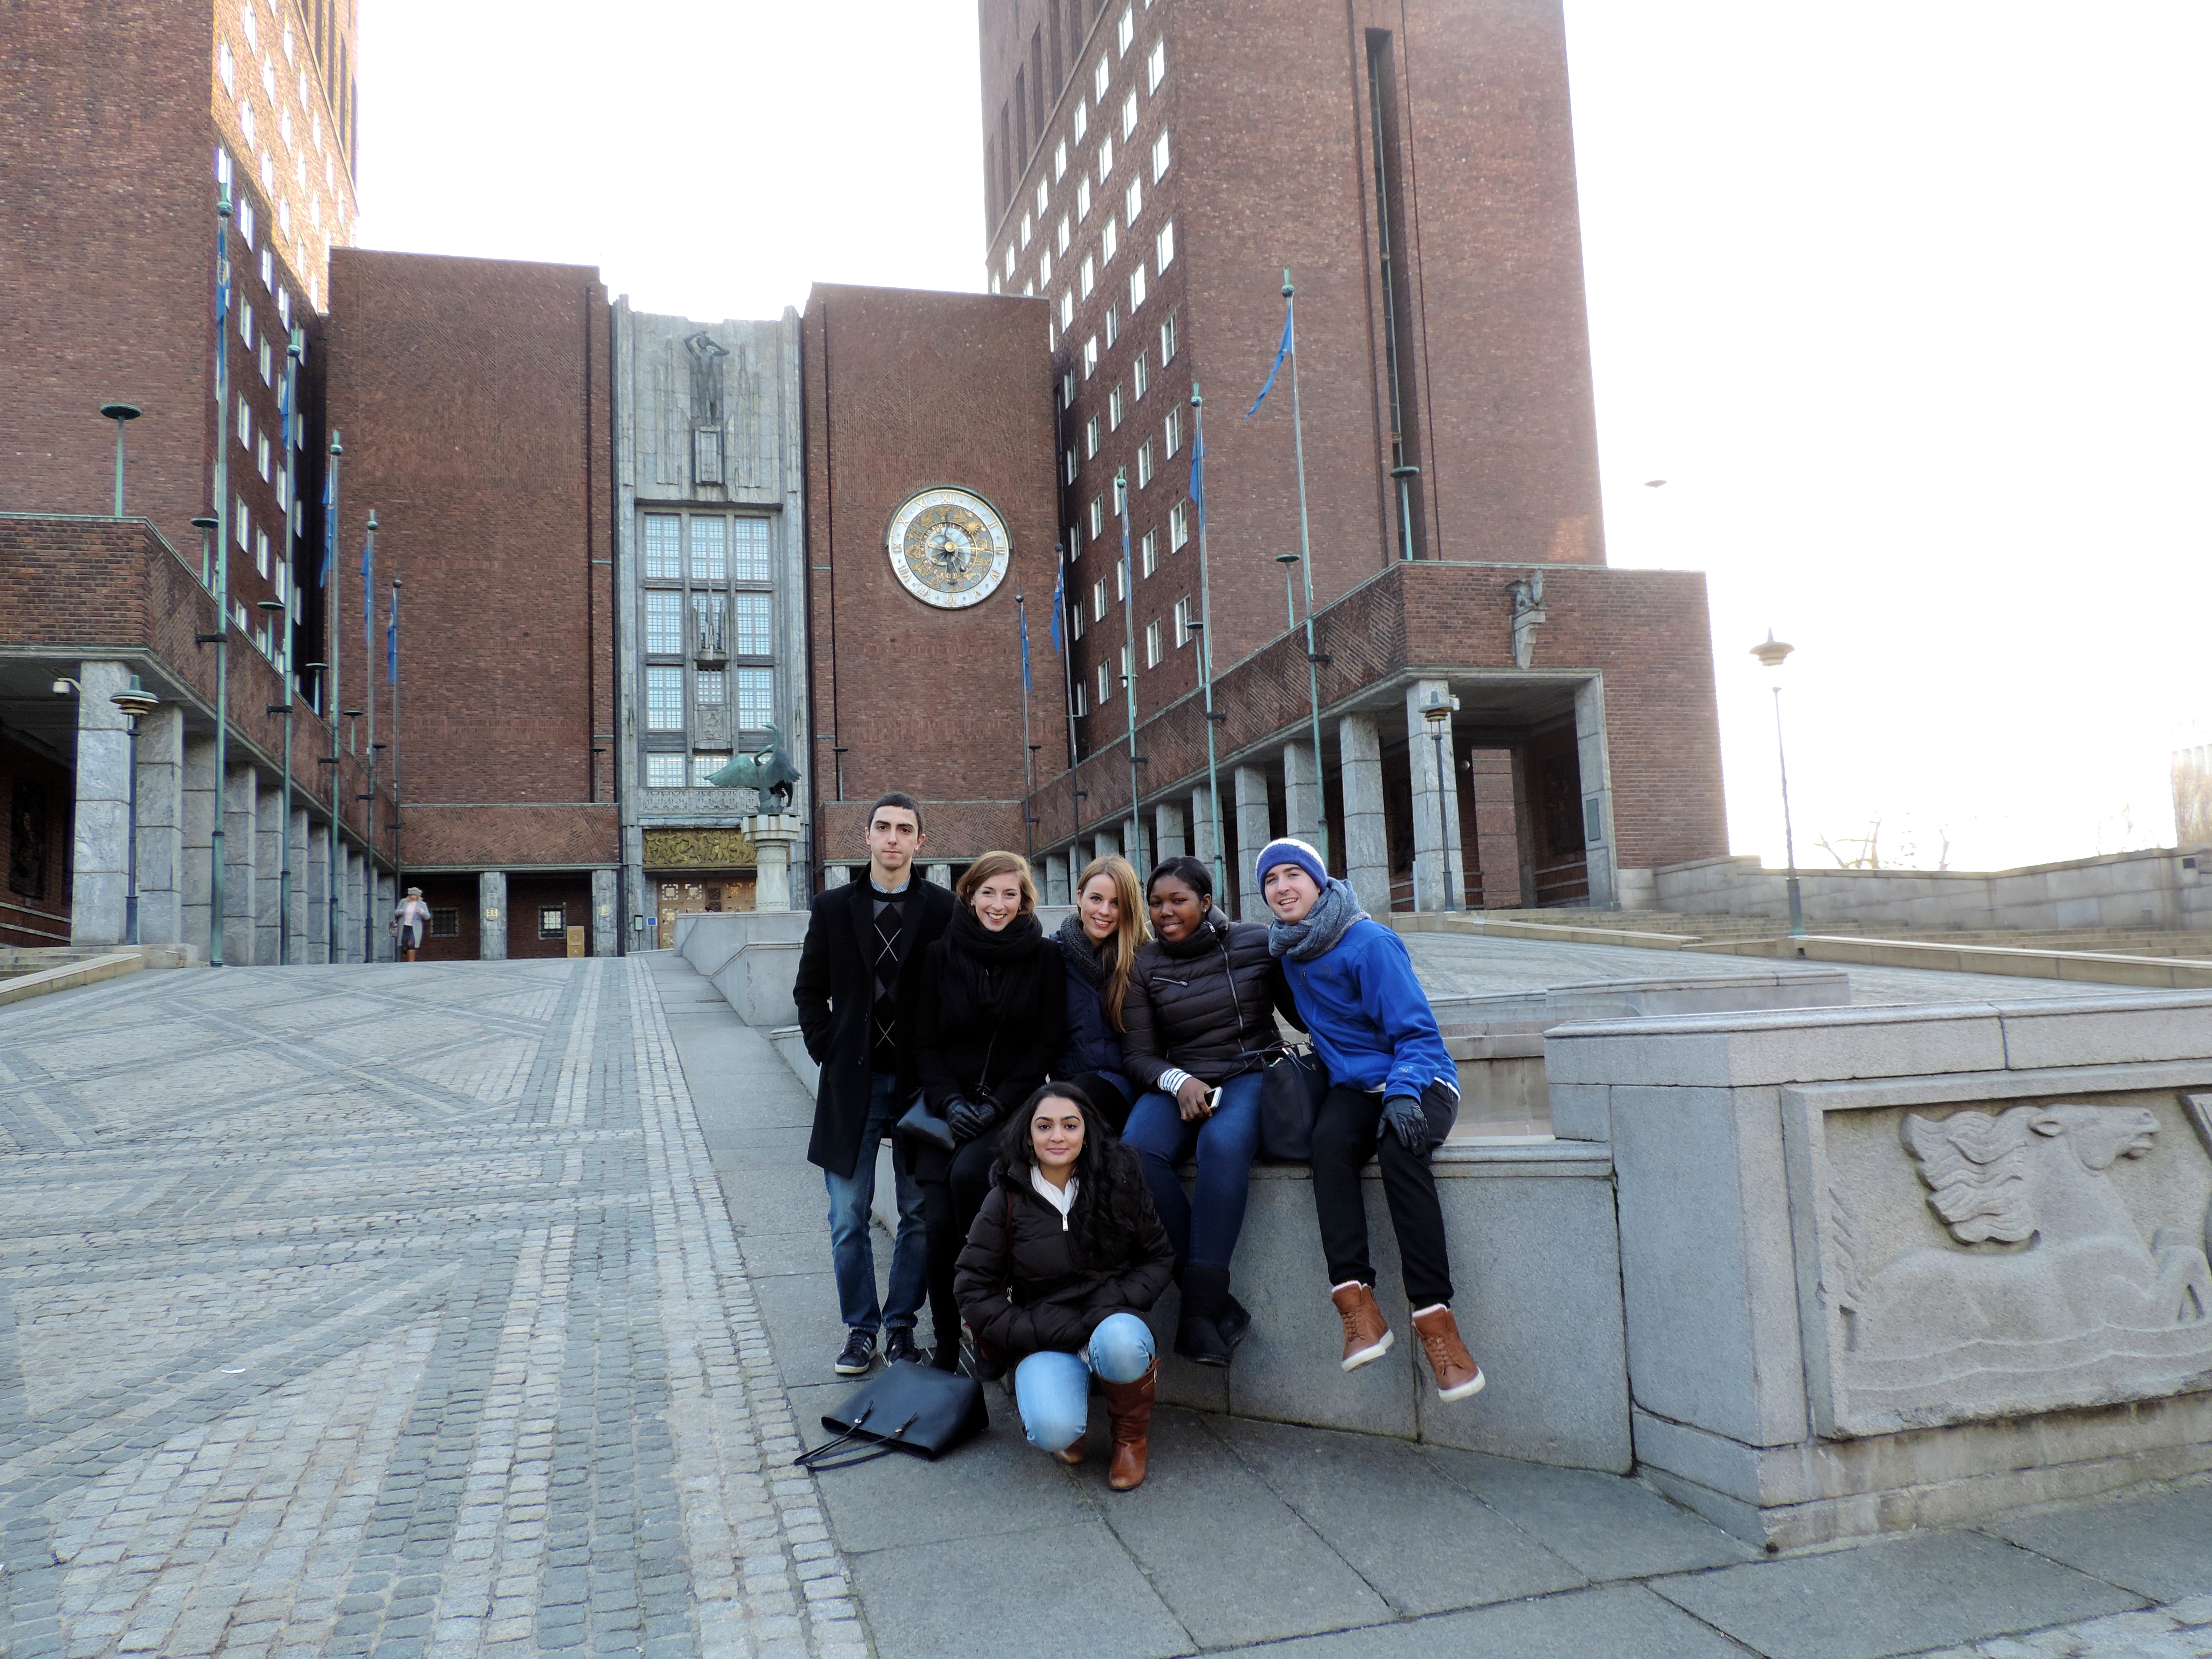 Pace New York City Model UN students visit Oslo City Hall while attending the 2015 OsloMUN conference in Norway. 